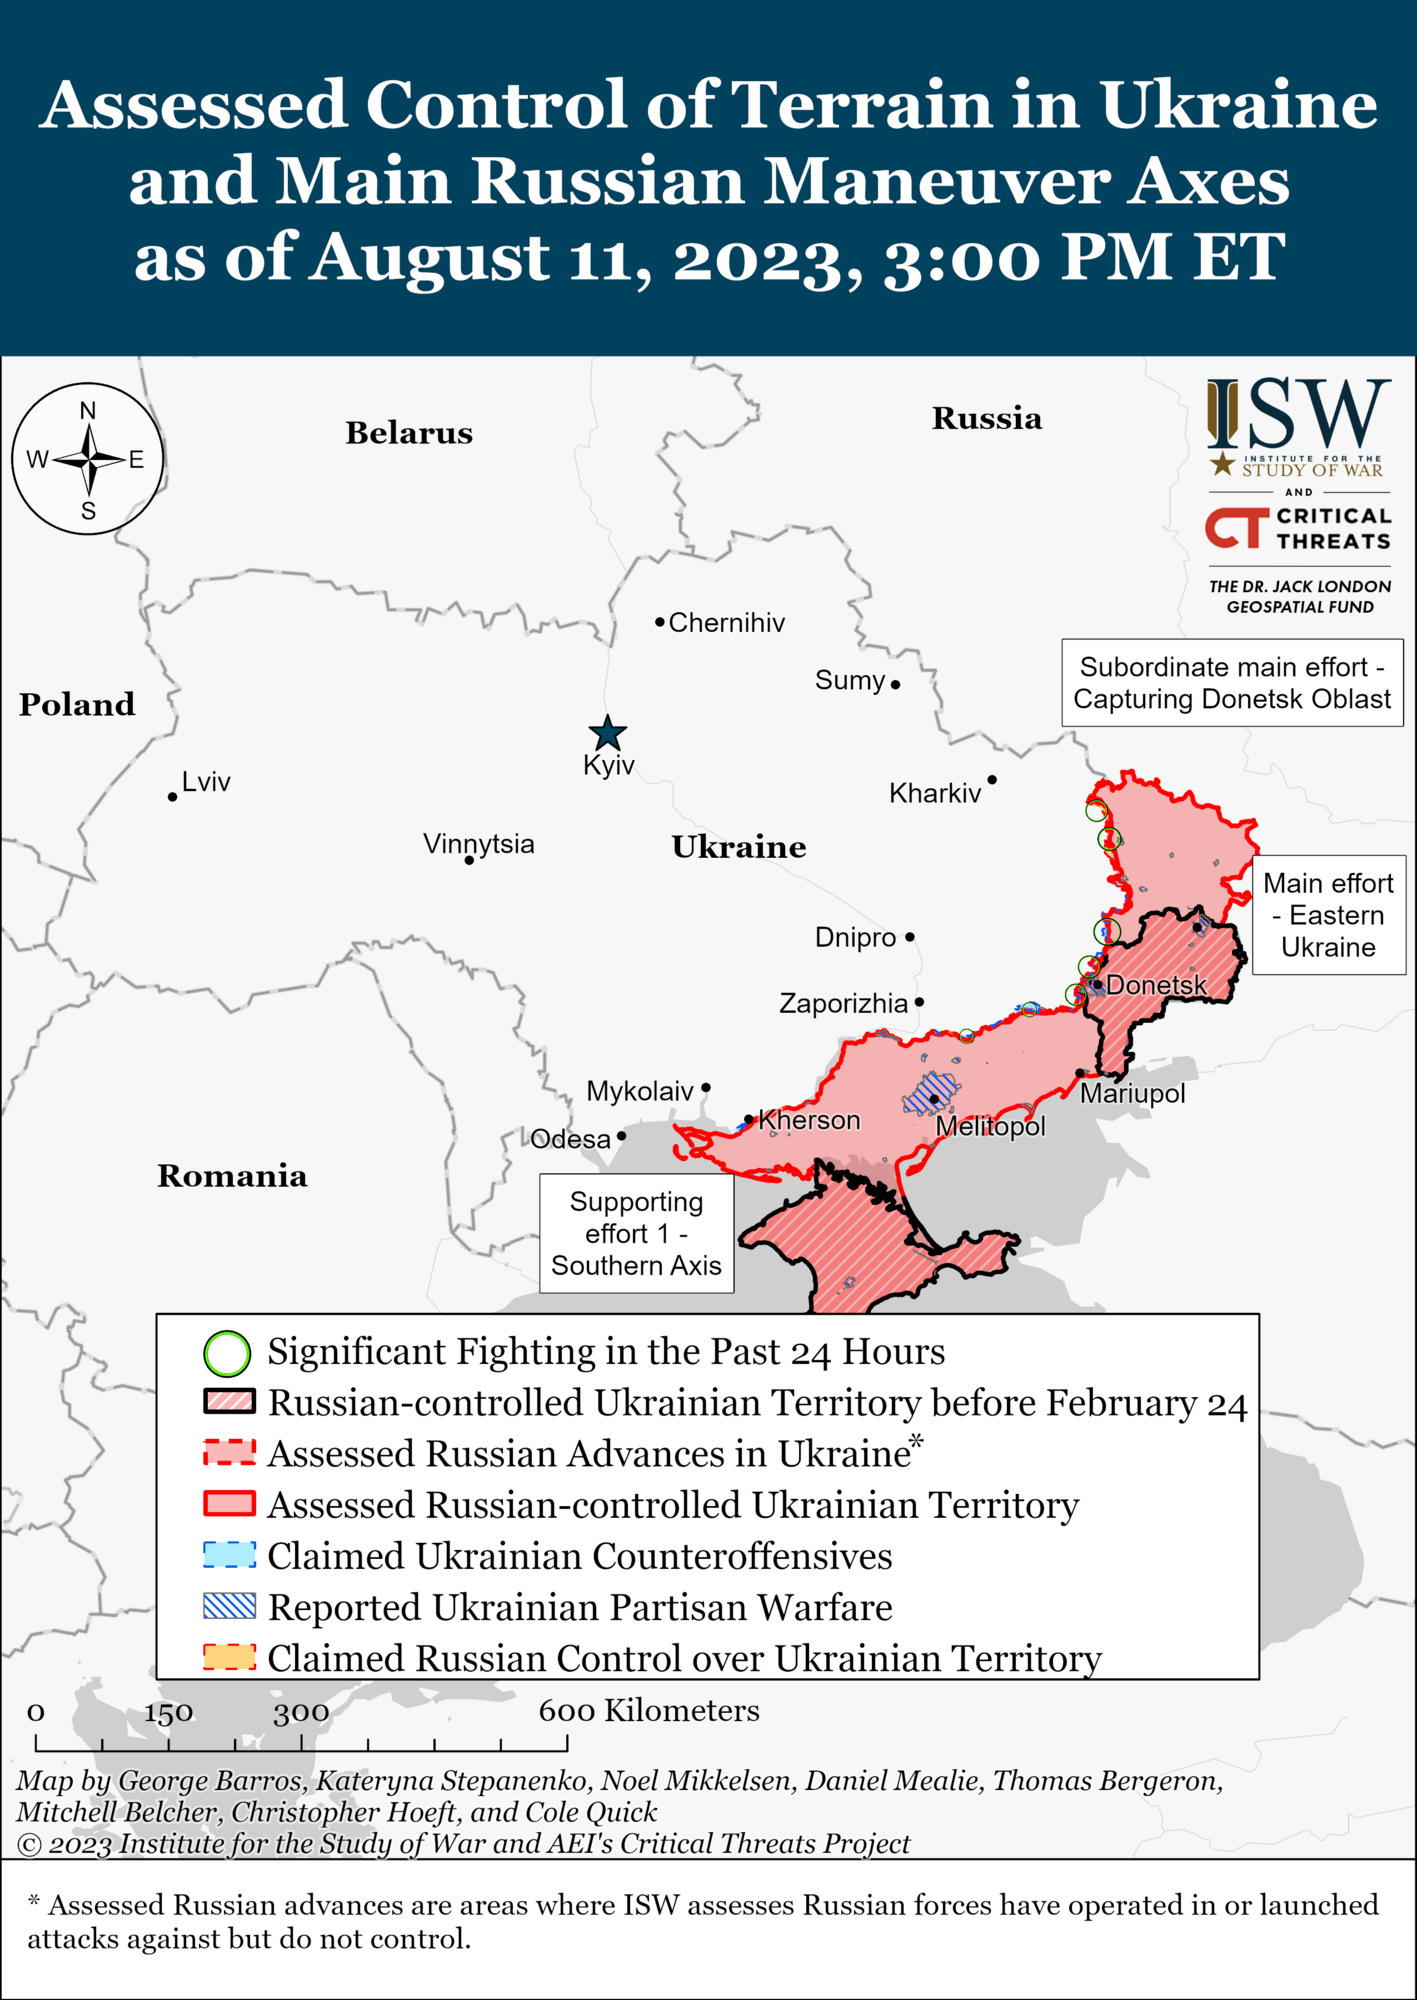 ISW: Ukrainian counteroffensive is successful in western Zaporizhzhia region, forcing occupiers to redeploy